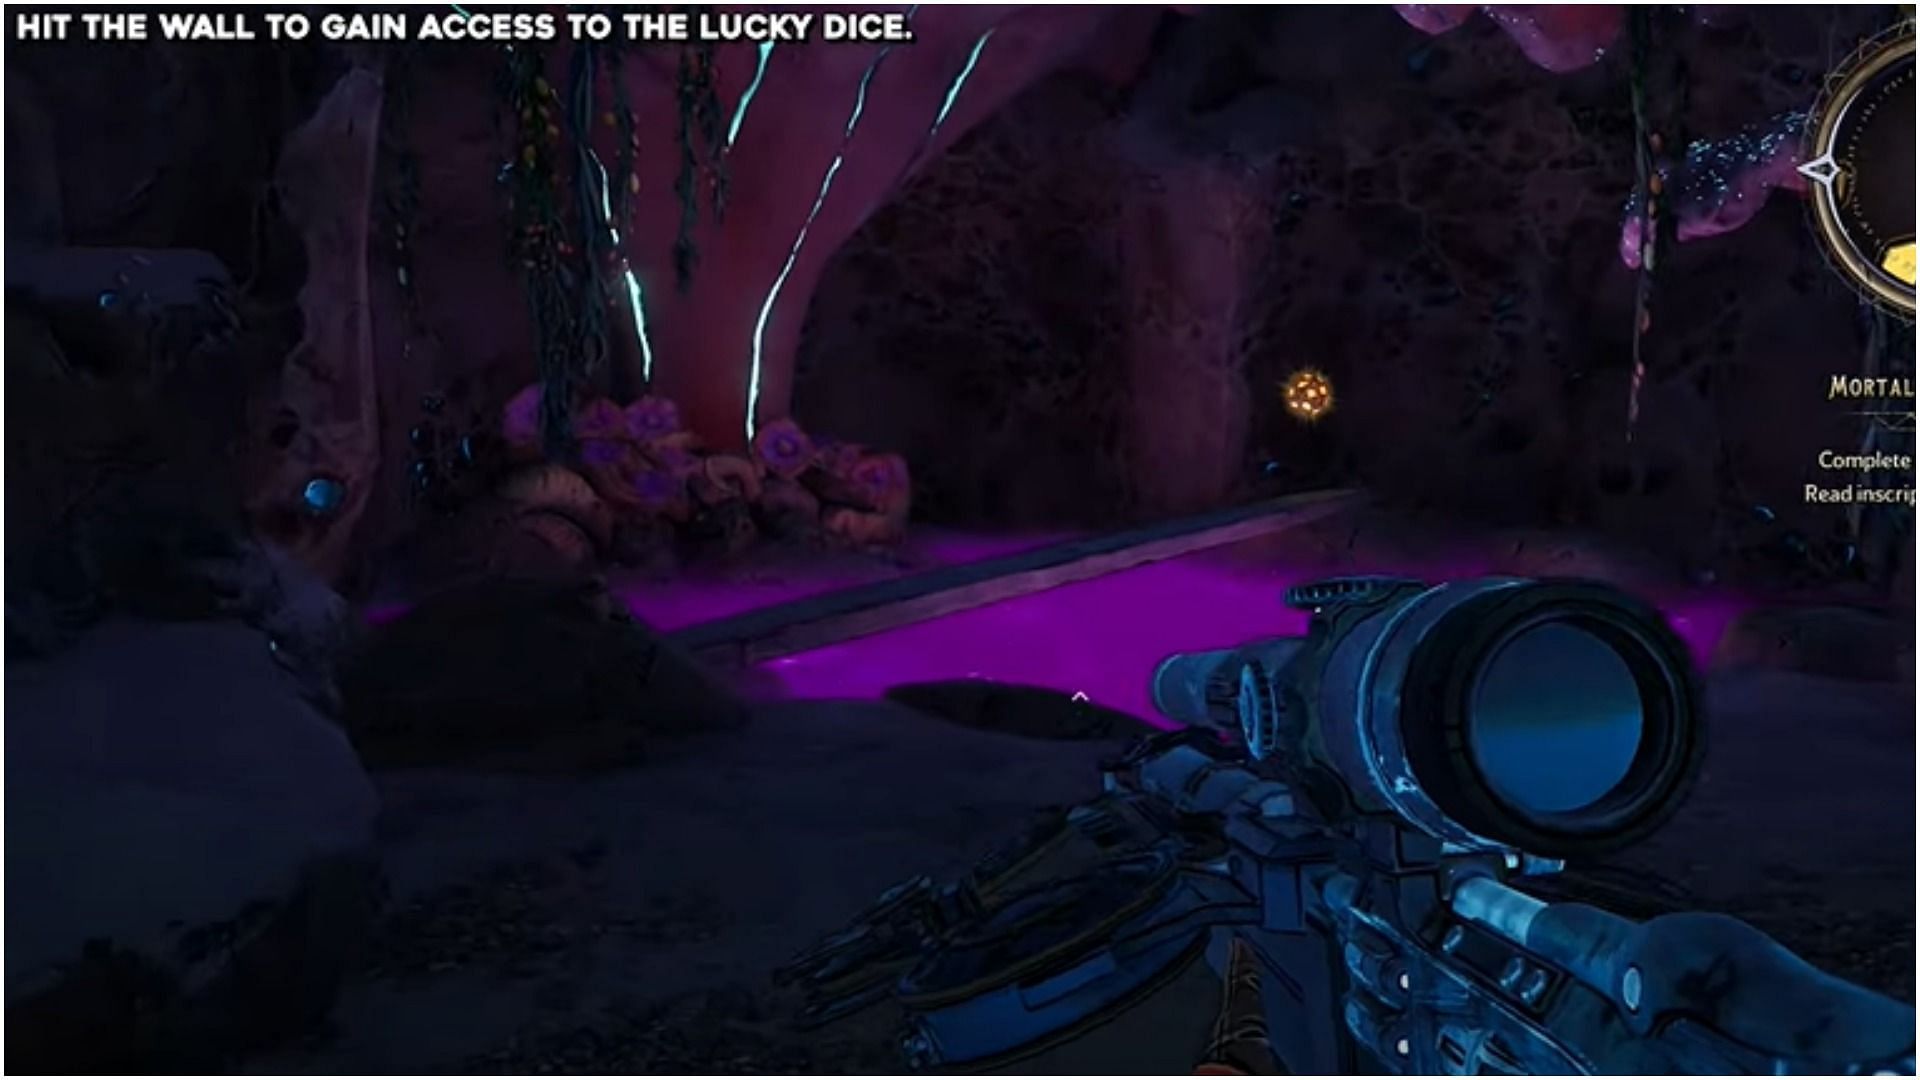 Players should use caution in this location since the purple goo is deadly (Image via YouTube/100% Guides)